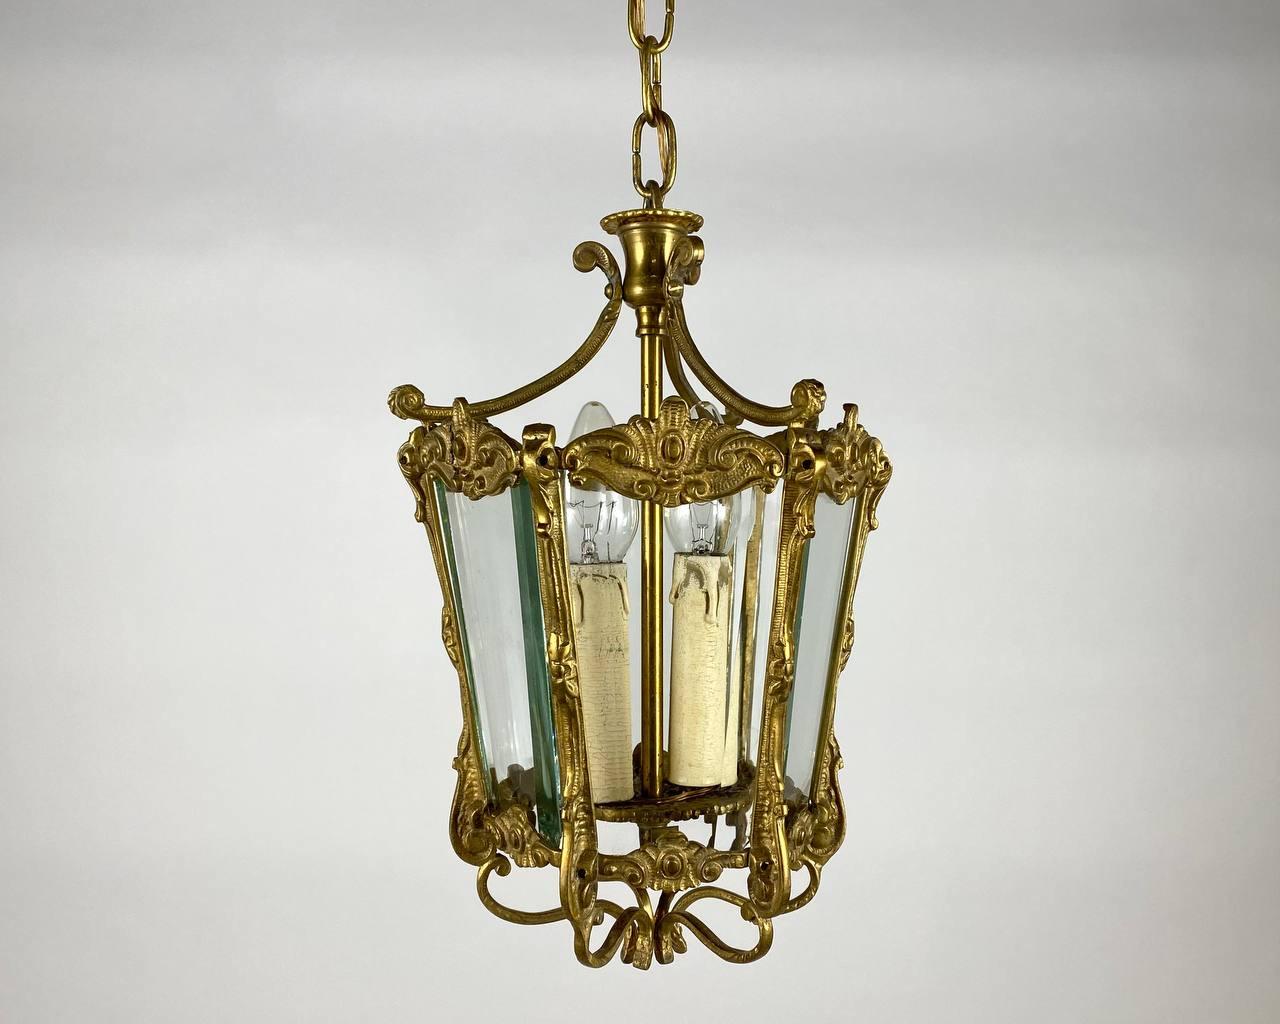 Amazing gilded bronze double light antique hall lantern, the two scrolling light fittings with circular reeded bobeche drip pans, surrounded by sectional convex tapering glass panels and held within a foliated scrolling framework with decorative